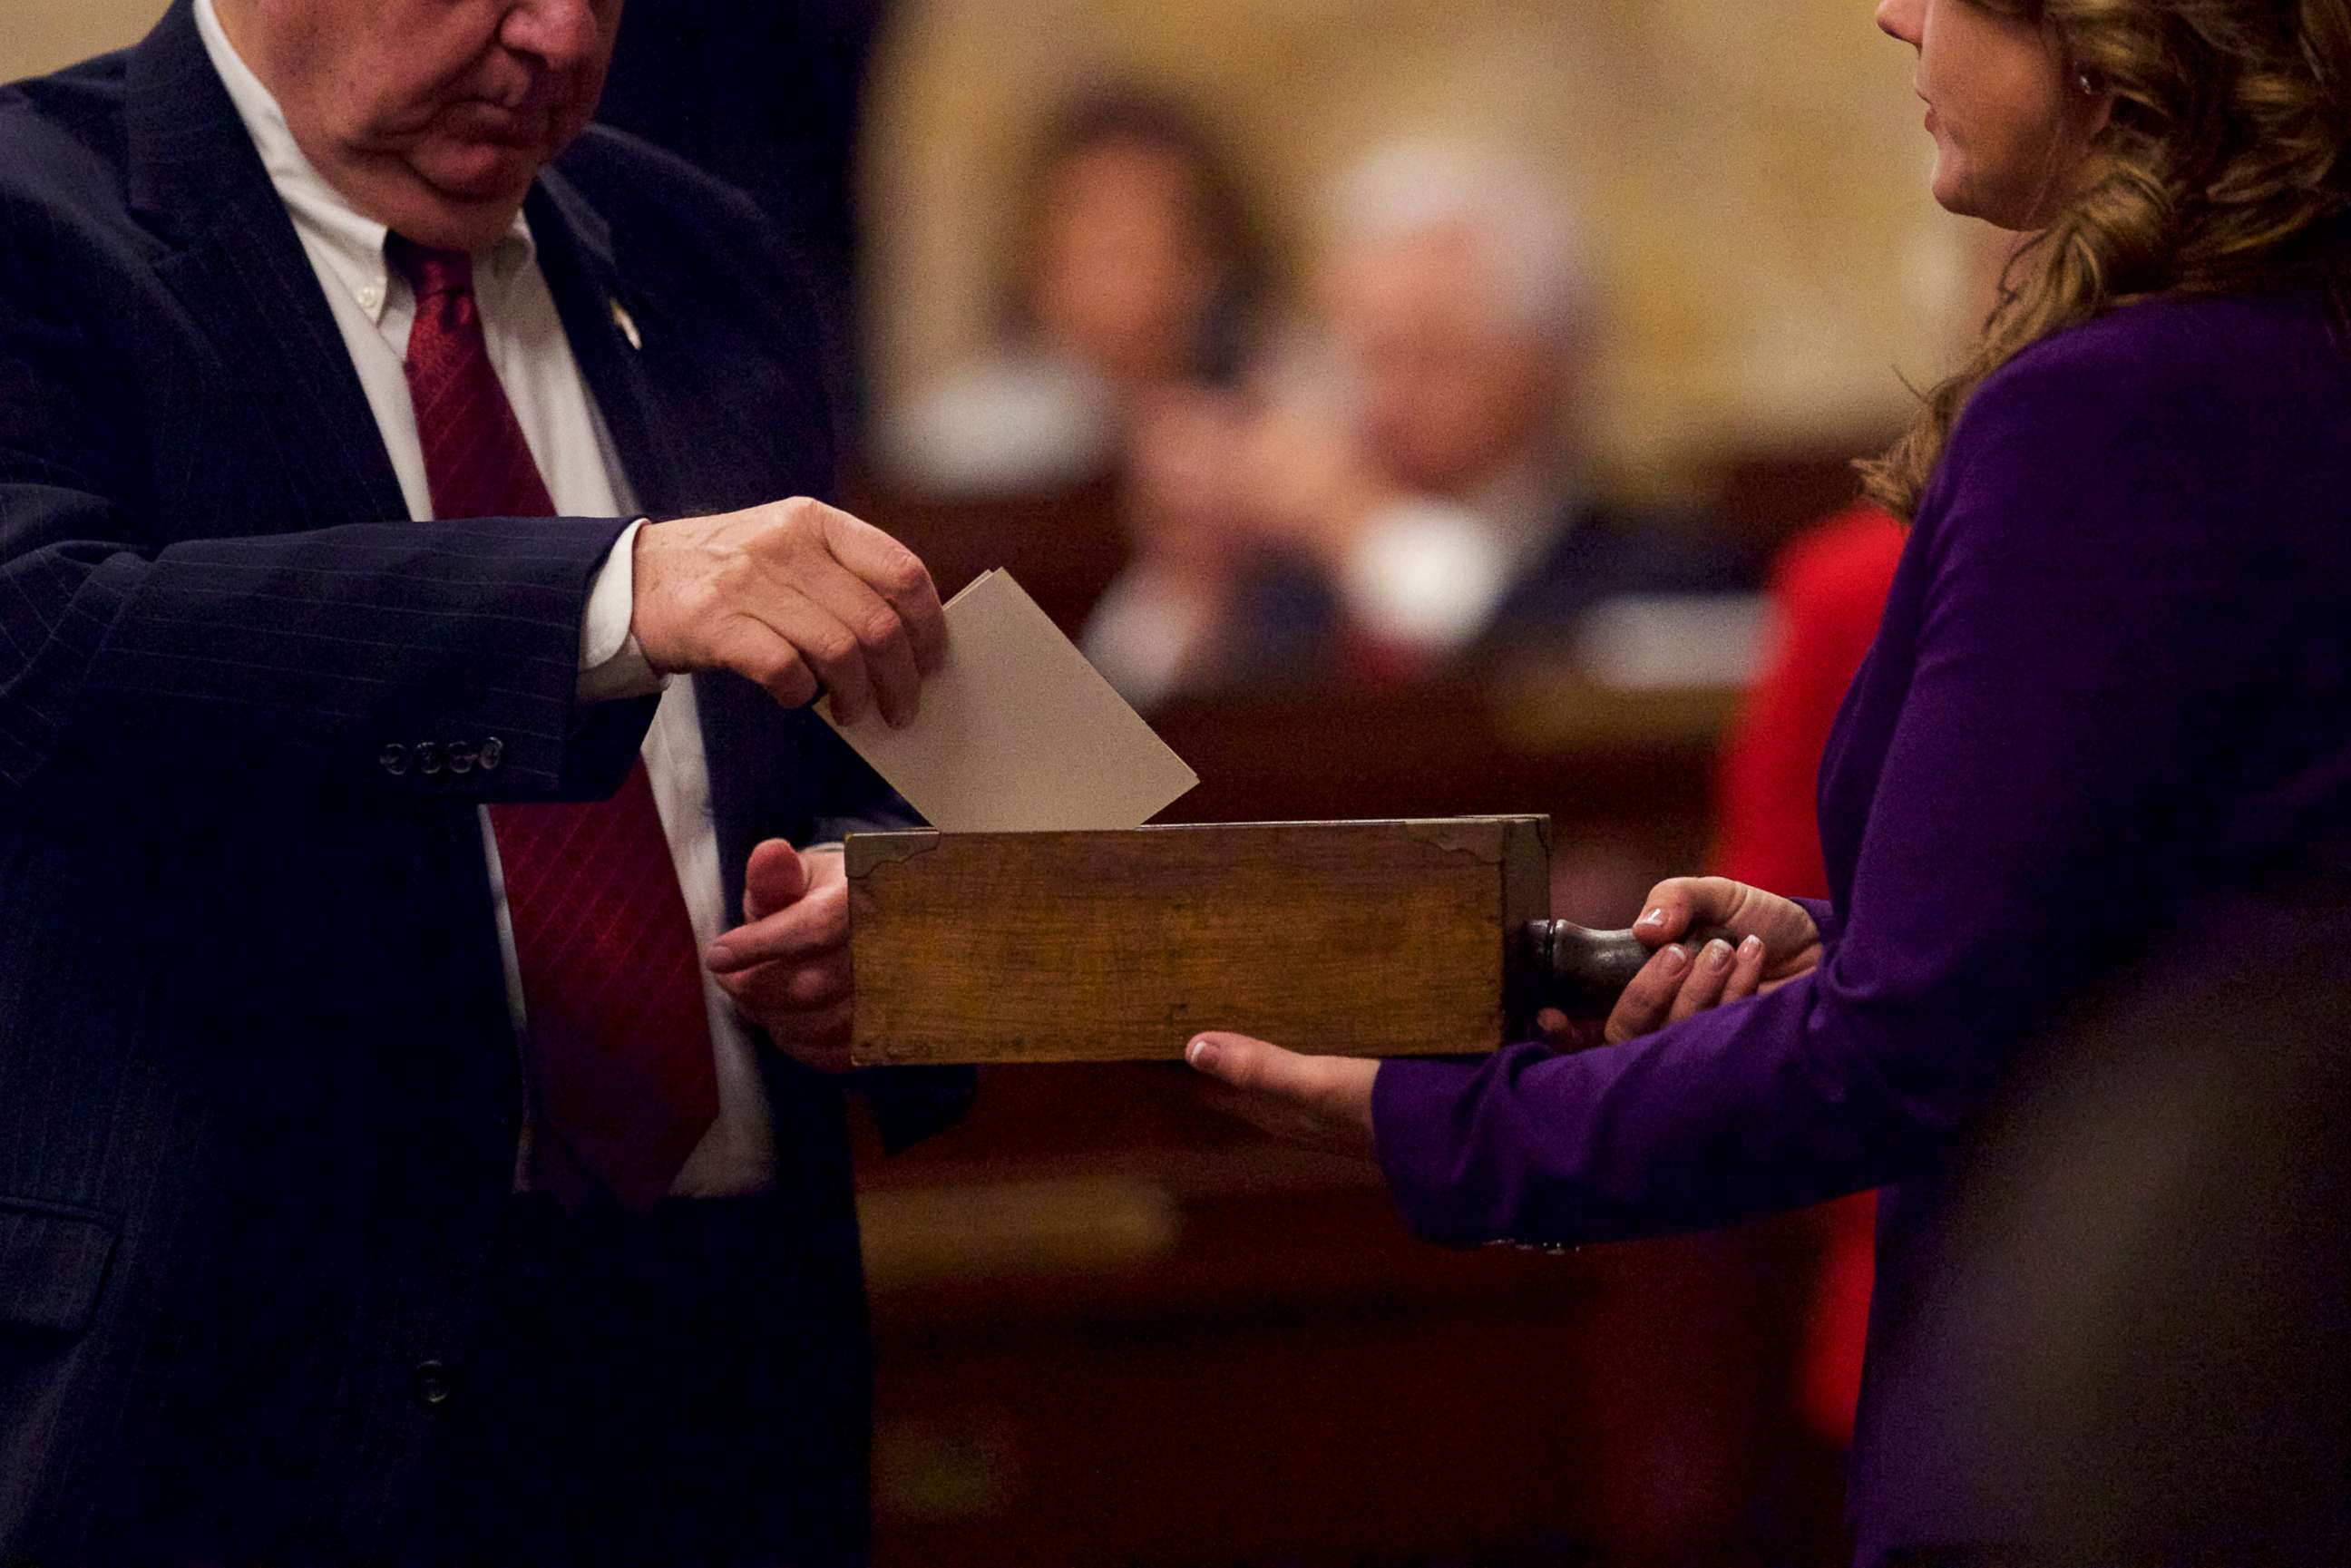 PHOTO: In this Dec. 19, 2016, file photo, an elector places his signed ballot into a ballot box within the House of Representatives chamber of the Pennsylvania Capitol Building in Harrisburg, Penn.